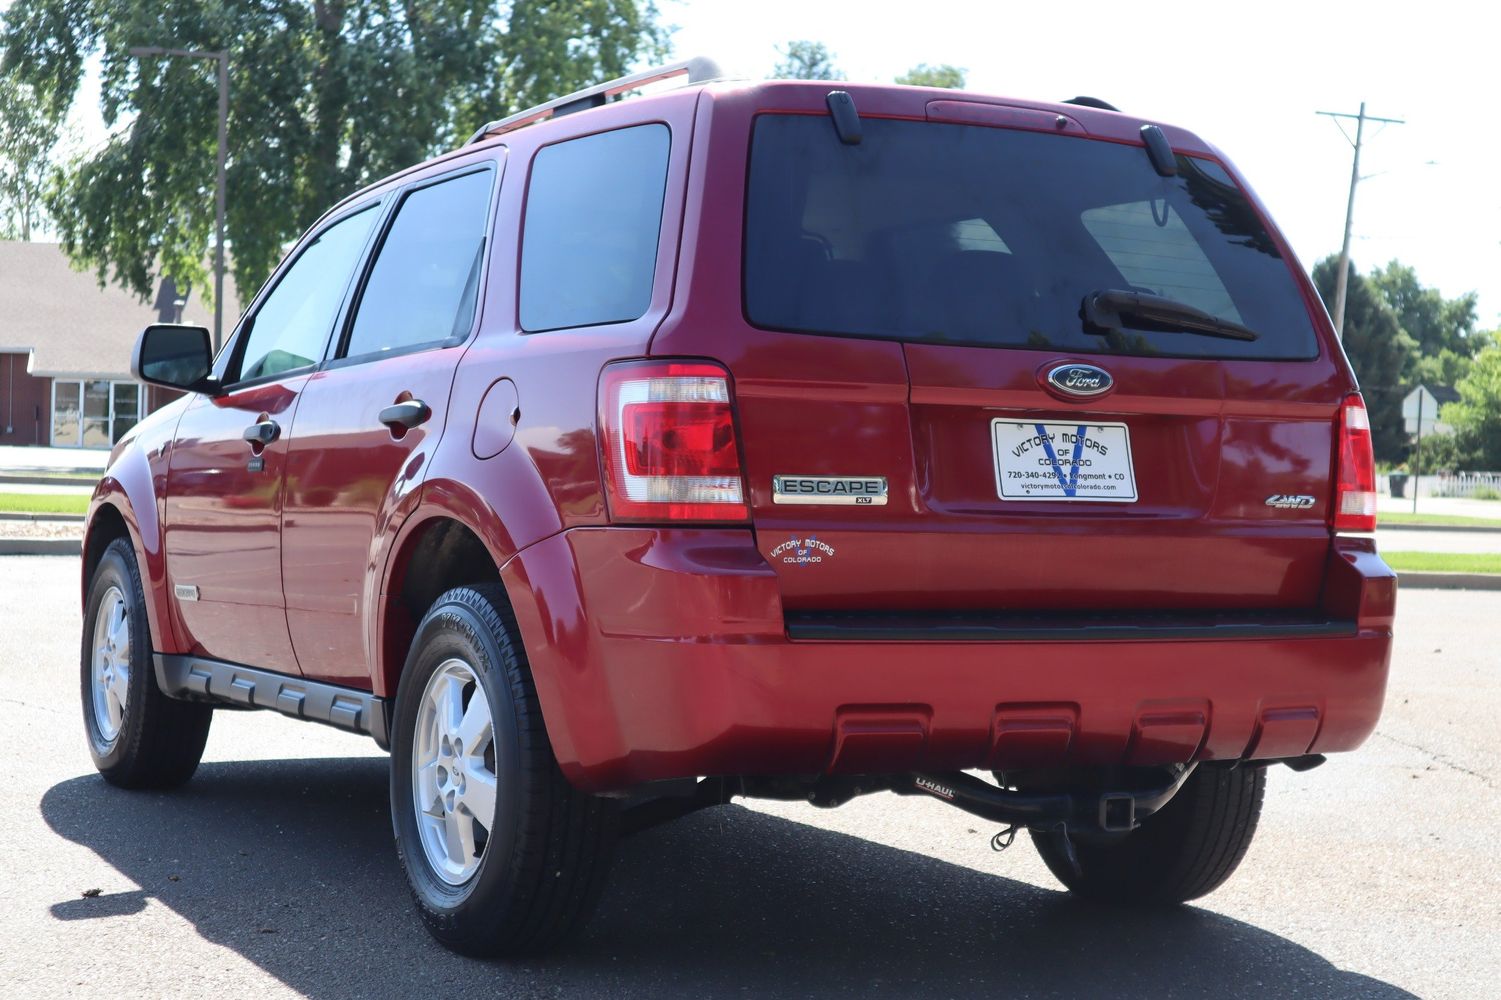 2008 Ford Escape XLT | Victory Motors of Colorado 2008 Ford Escape Xlt 4wd V6 Towing Capacity